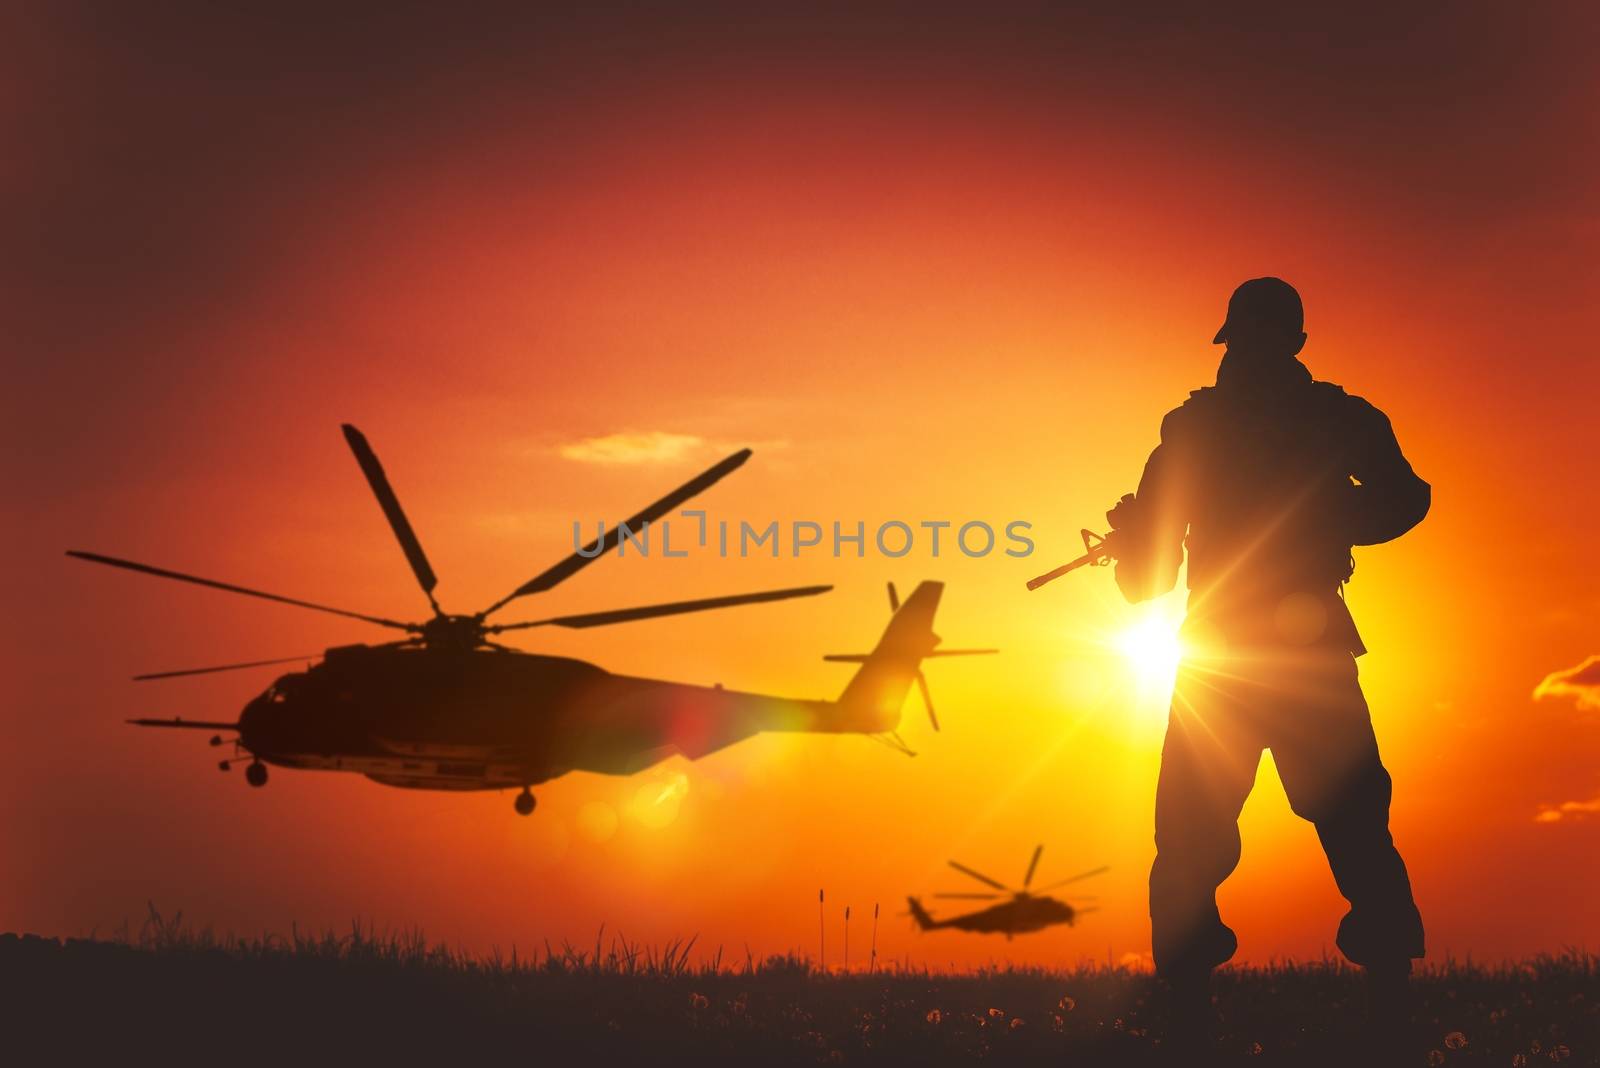 Military Mission at Sunset. Marines Helicopters Air Mission. Soldier with Assault Rifle Cover the Area.